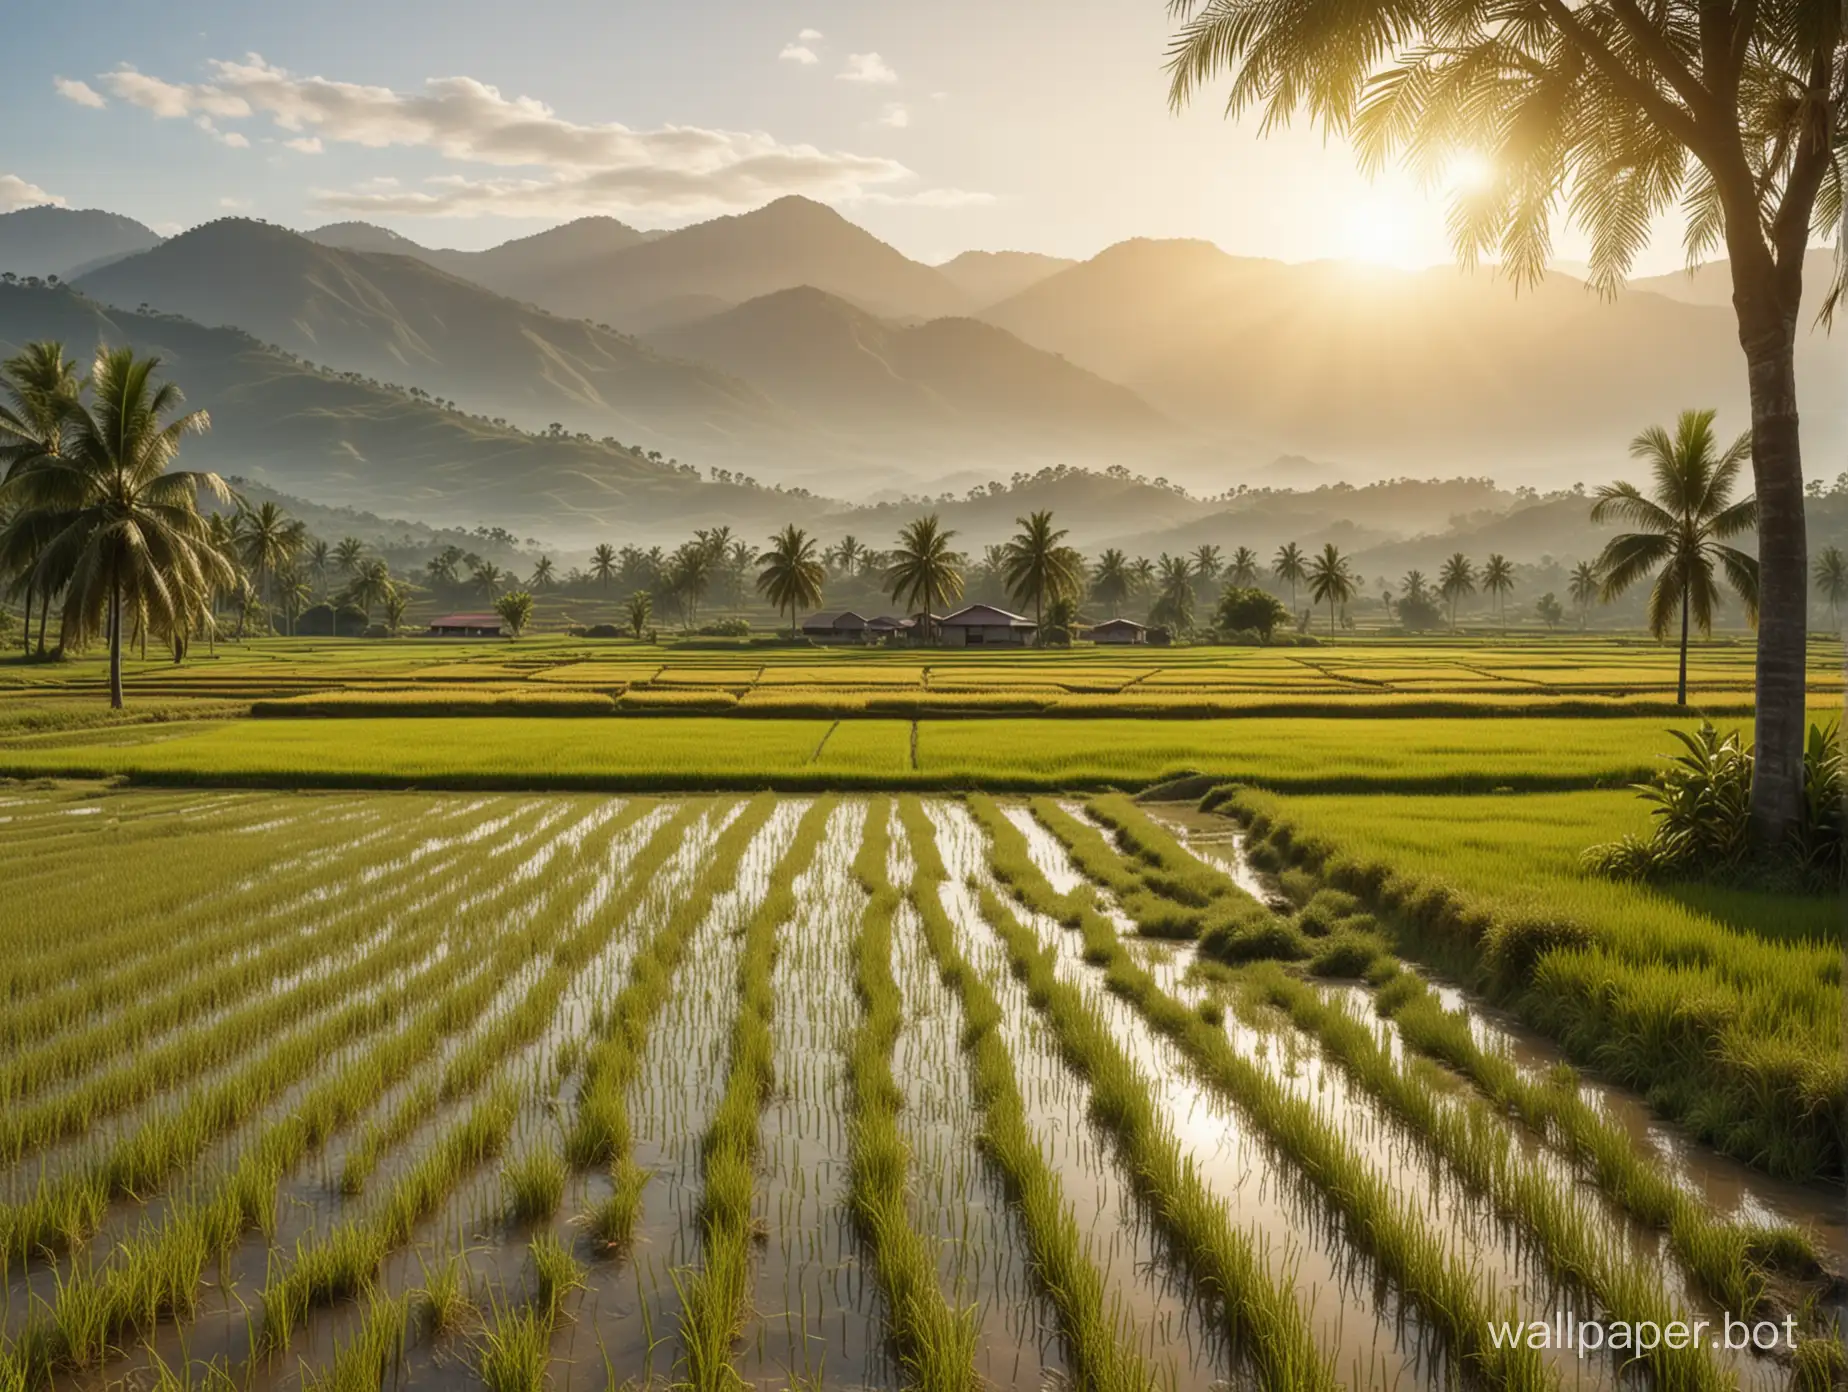 Farm view, background with rice field in front and open ground in the middle and rice fields in the foreground and the back, green mountains in the back, morning mood, realistic and highly detailed, sunlight scattering around. very few yellow trees in the back, and the camera is on the ground level.